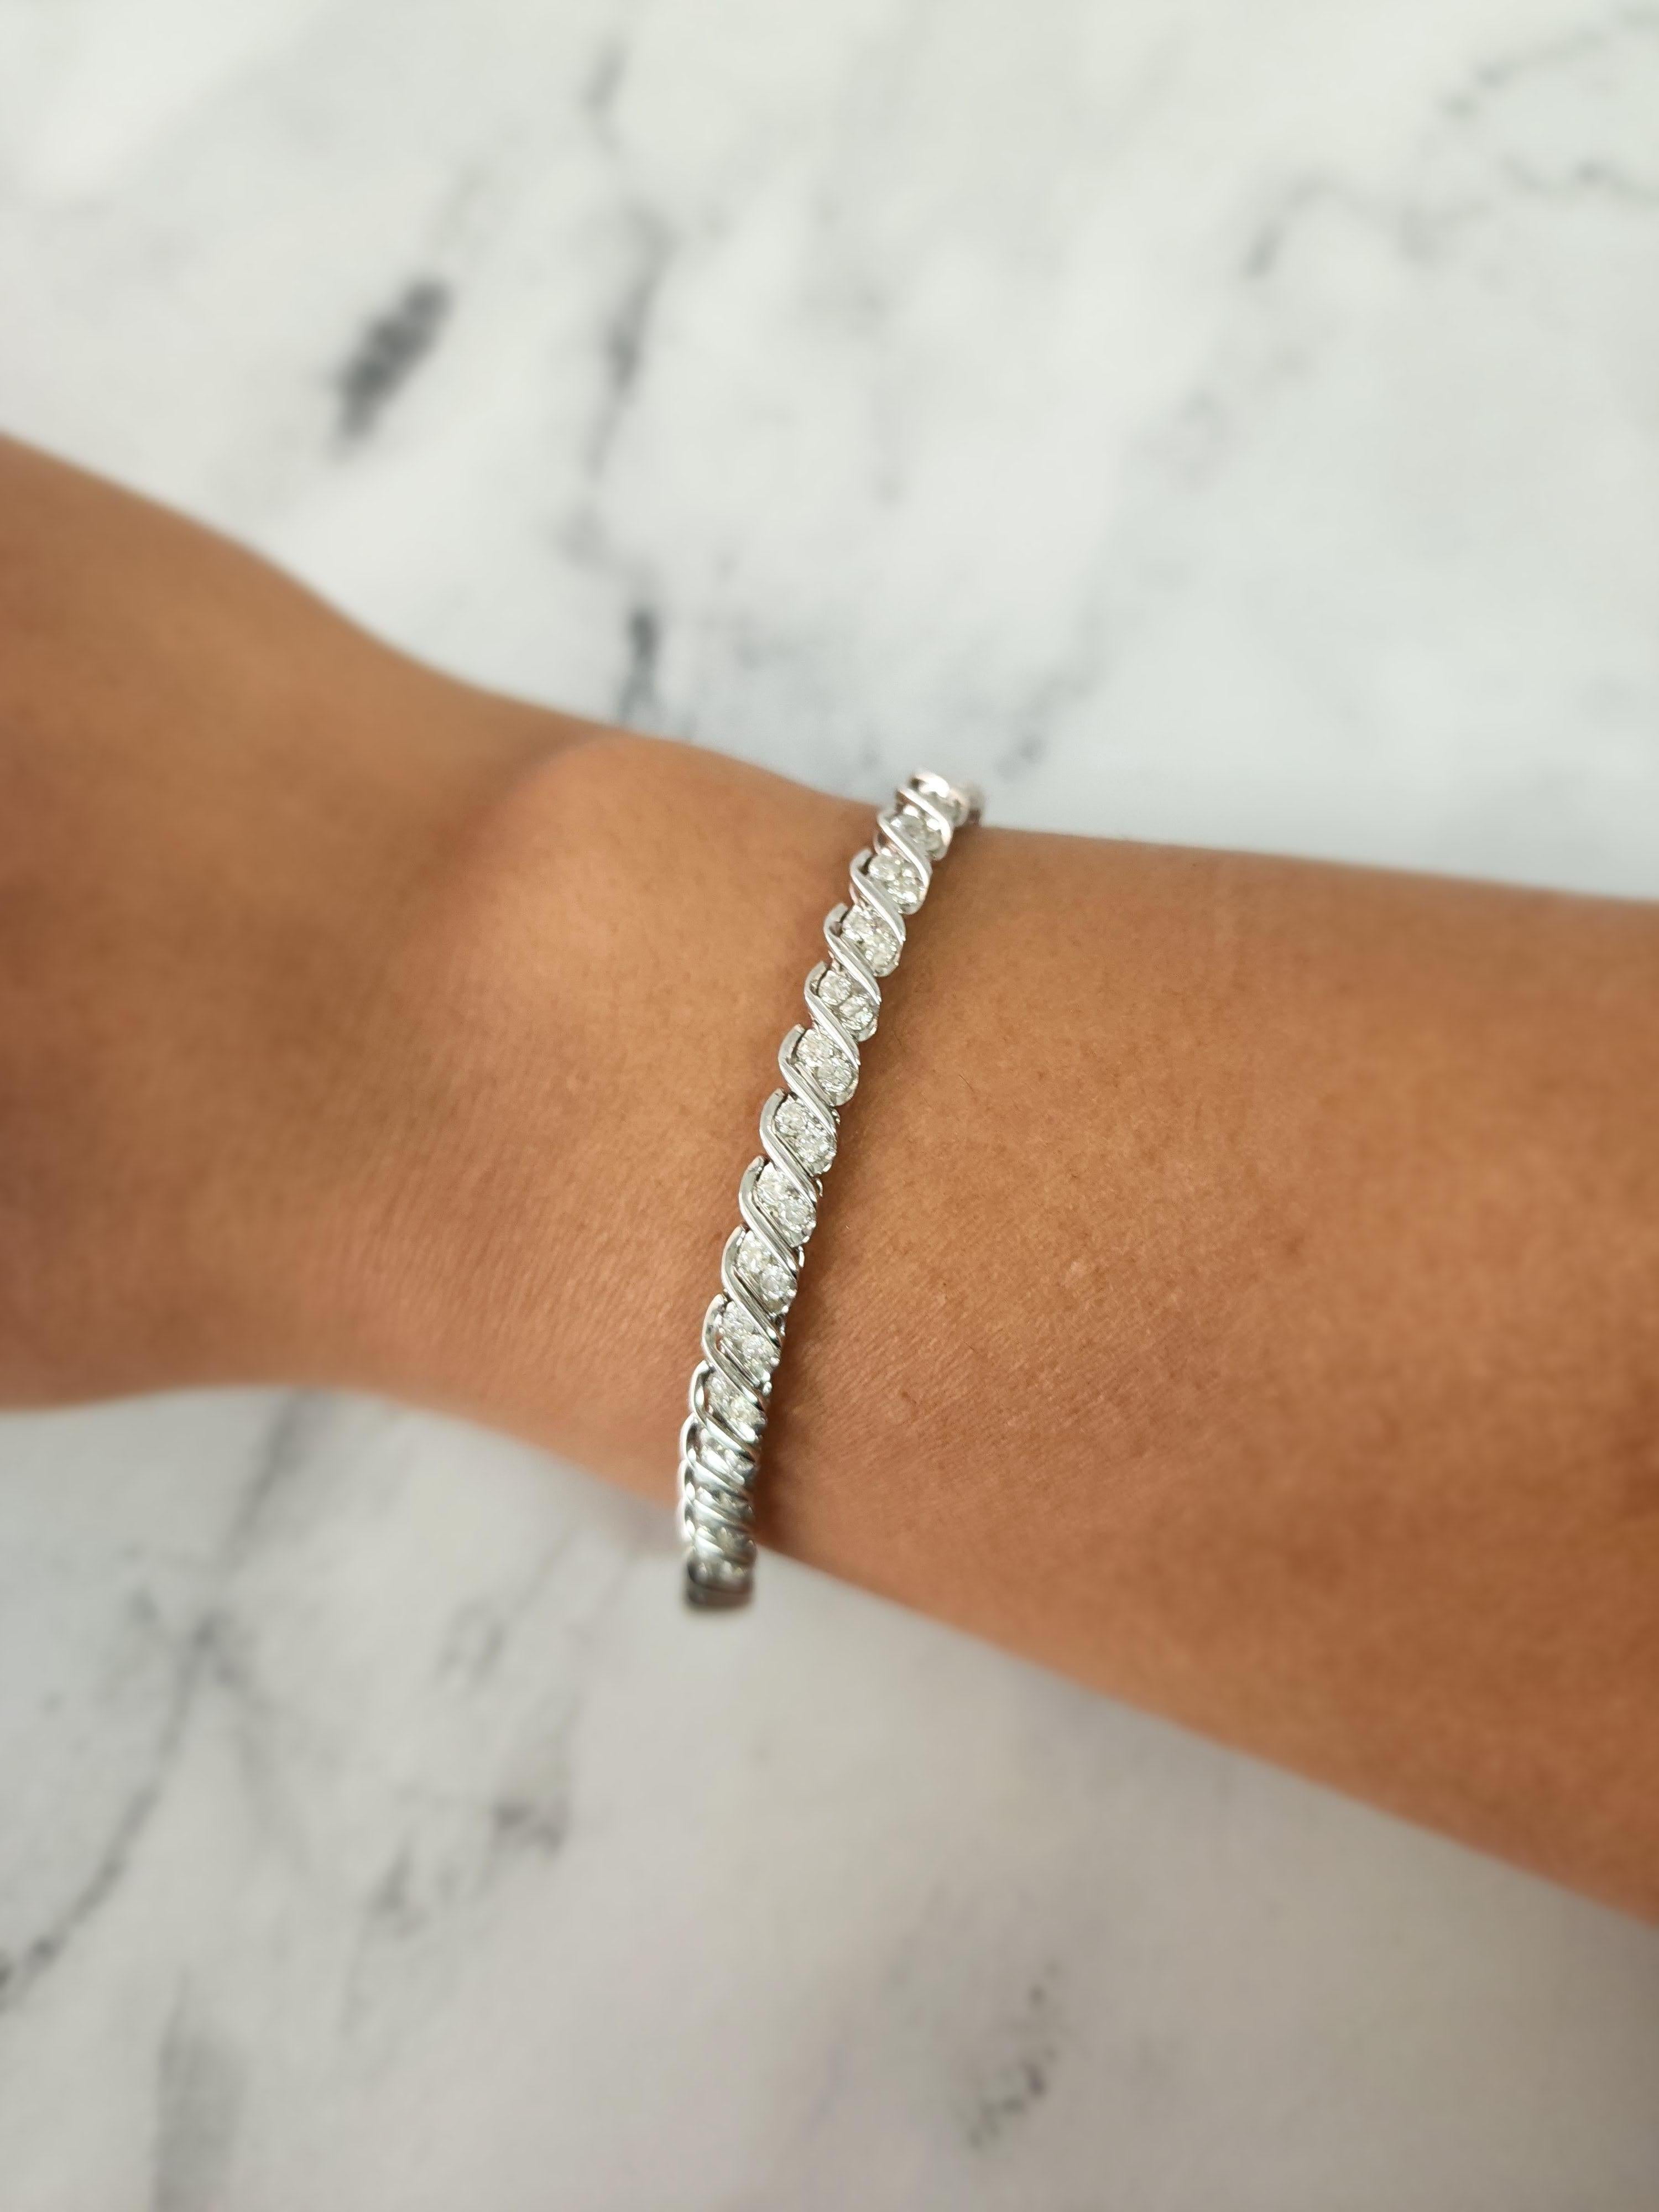 ♥ Tennis Bracelet Description ♥

Main Stone: Diamond 
Diamond Cut: Round
Metal Type: 14K White Gold
Bracelet Length: 7 Inches
**Can be shortened for an additional fee $45, once adjusted it's final sale